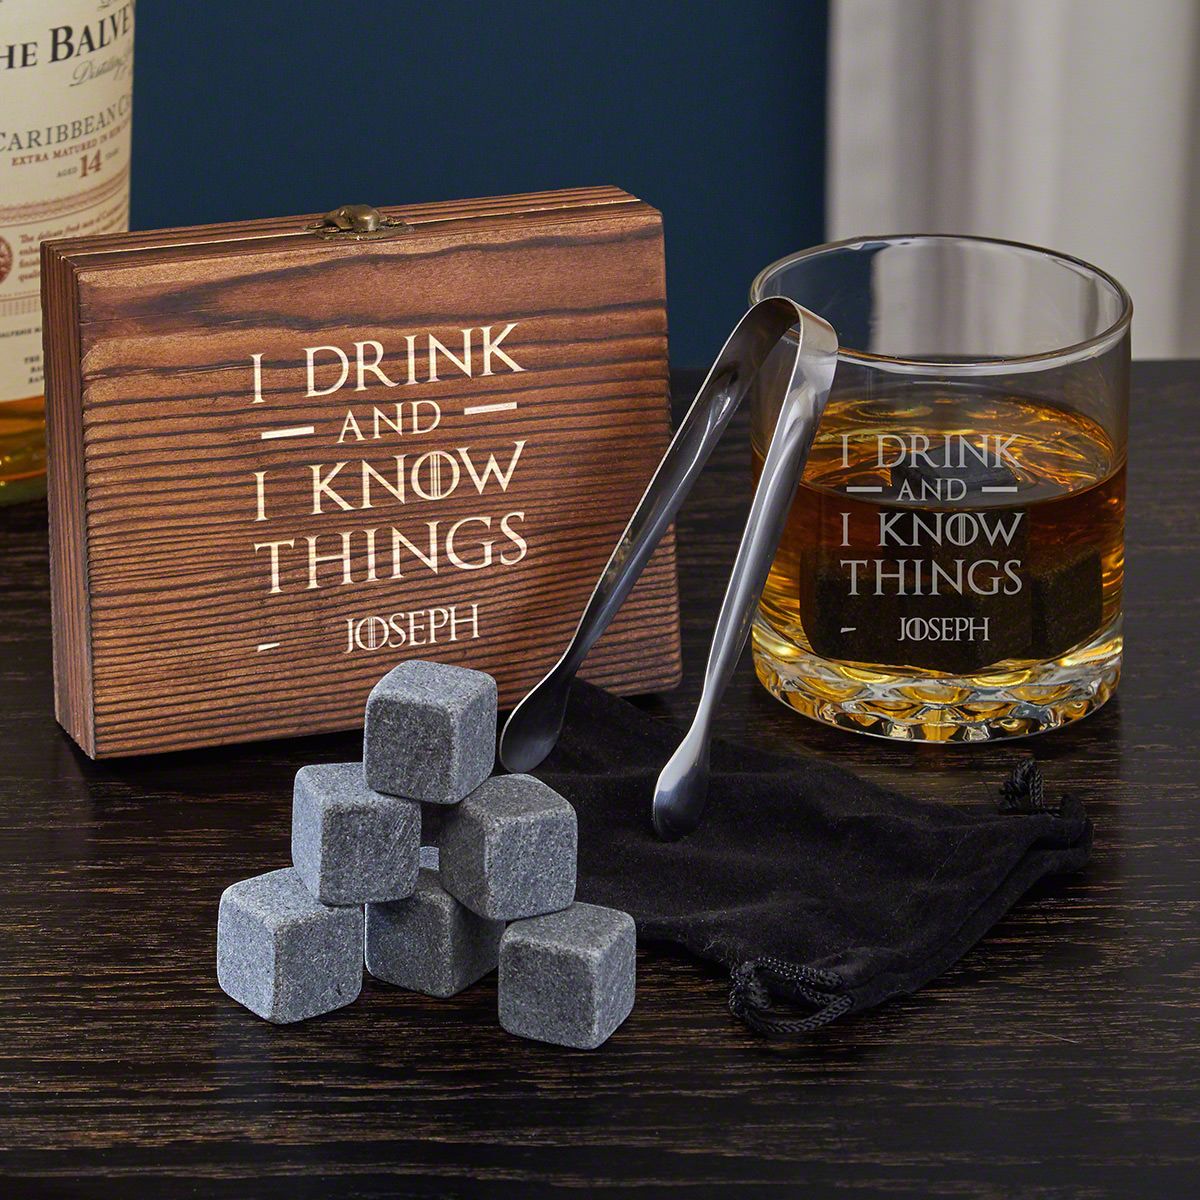 https://images.homewetbar.com/media/catalog/product/7/9/7954-i-drink-and-i-know-things-whiksey-chilling-stones-and-rocks-glass-set-primary.jpg?store=default&image-type=image